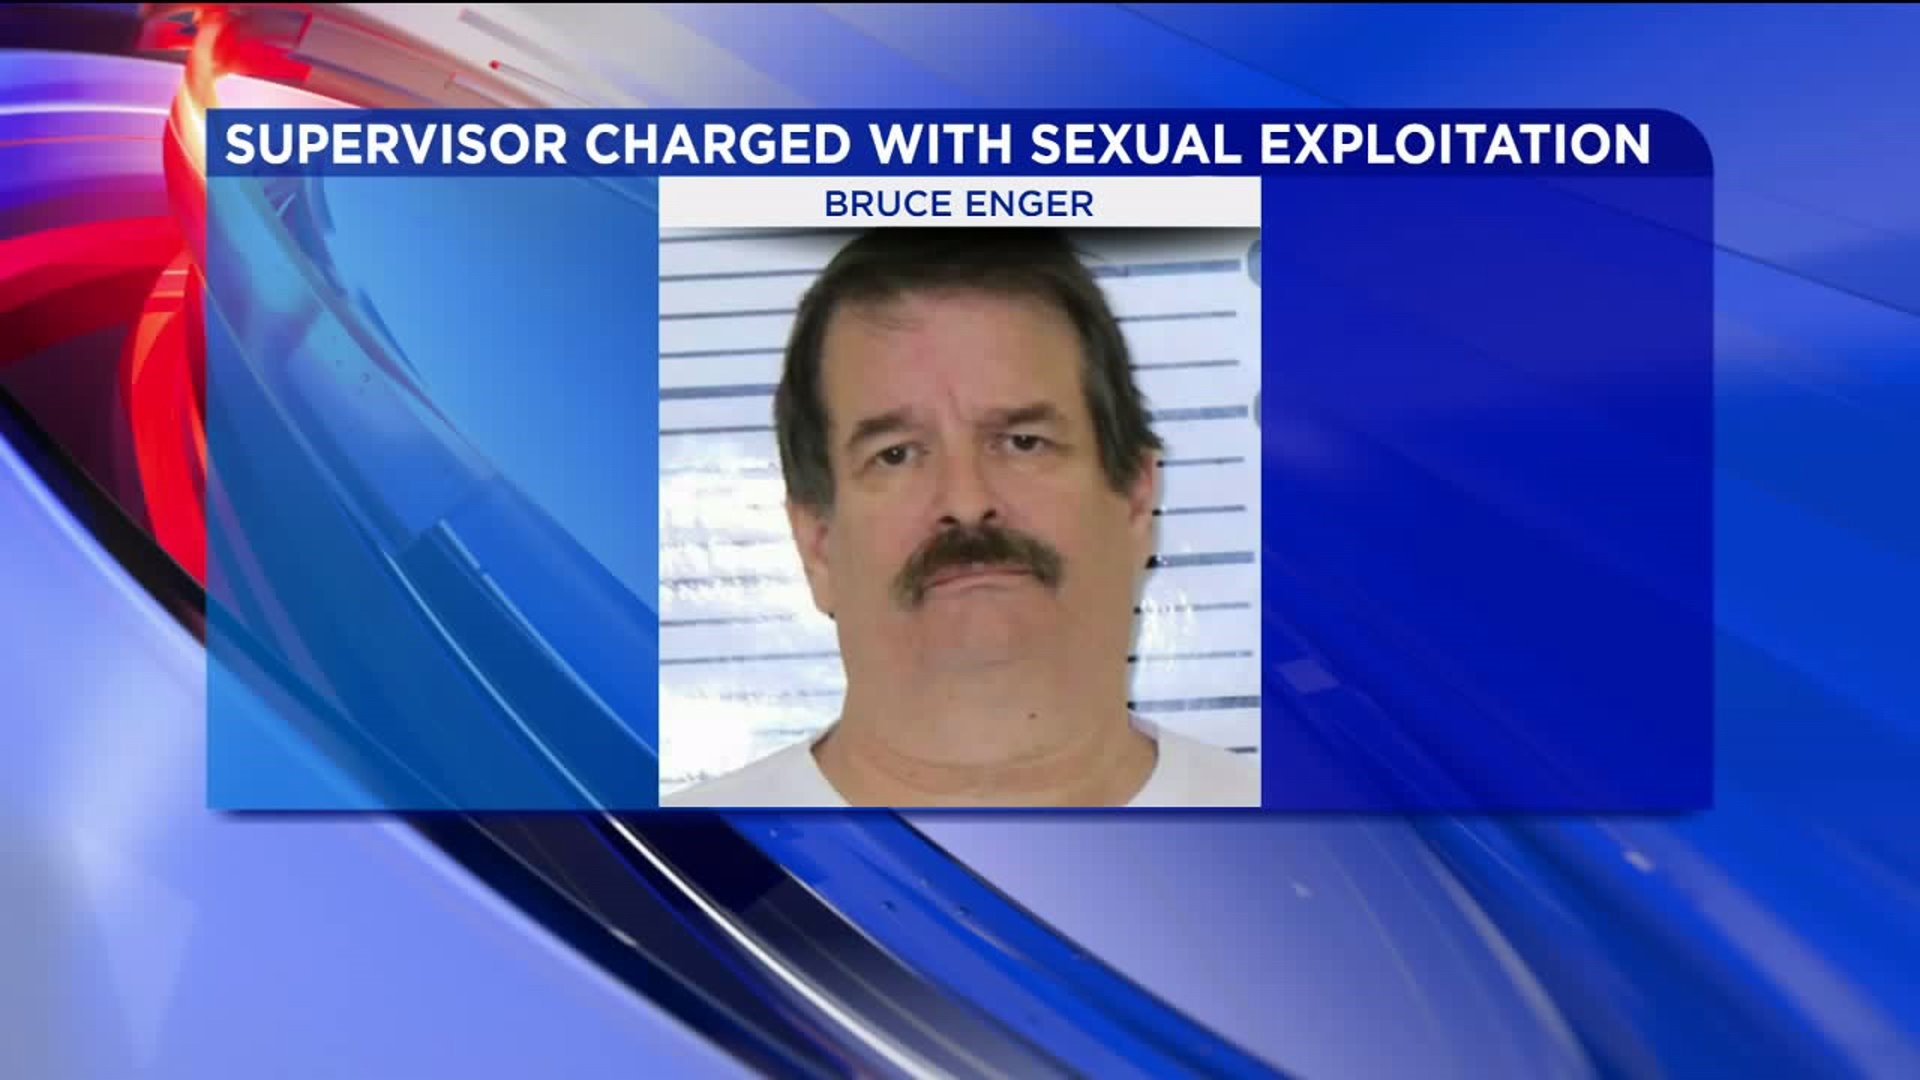 Supervisor at Davenport care facility accused of sexually abusing client